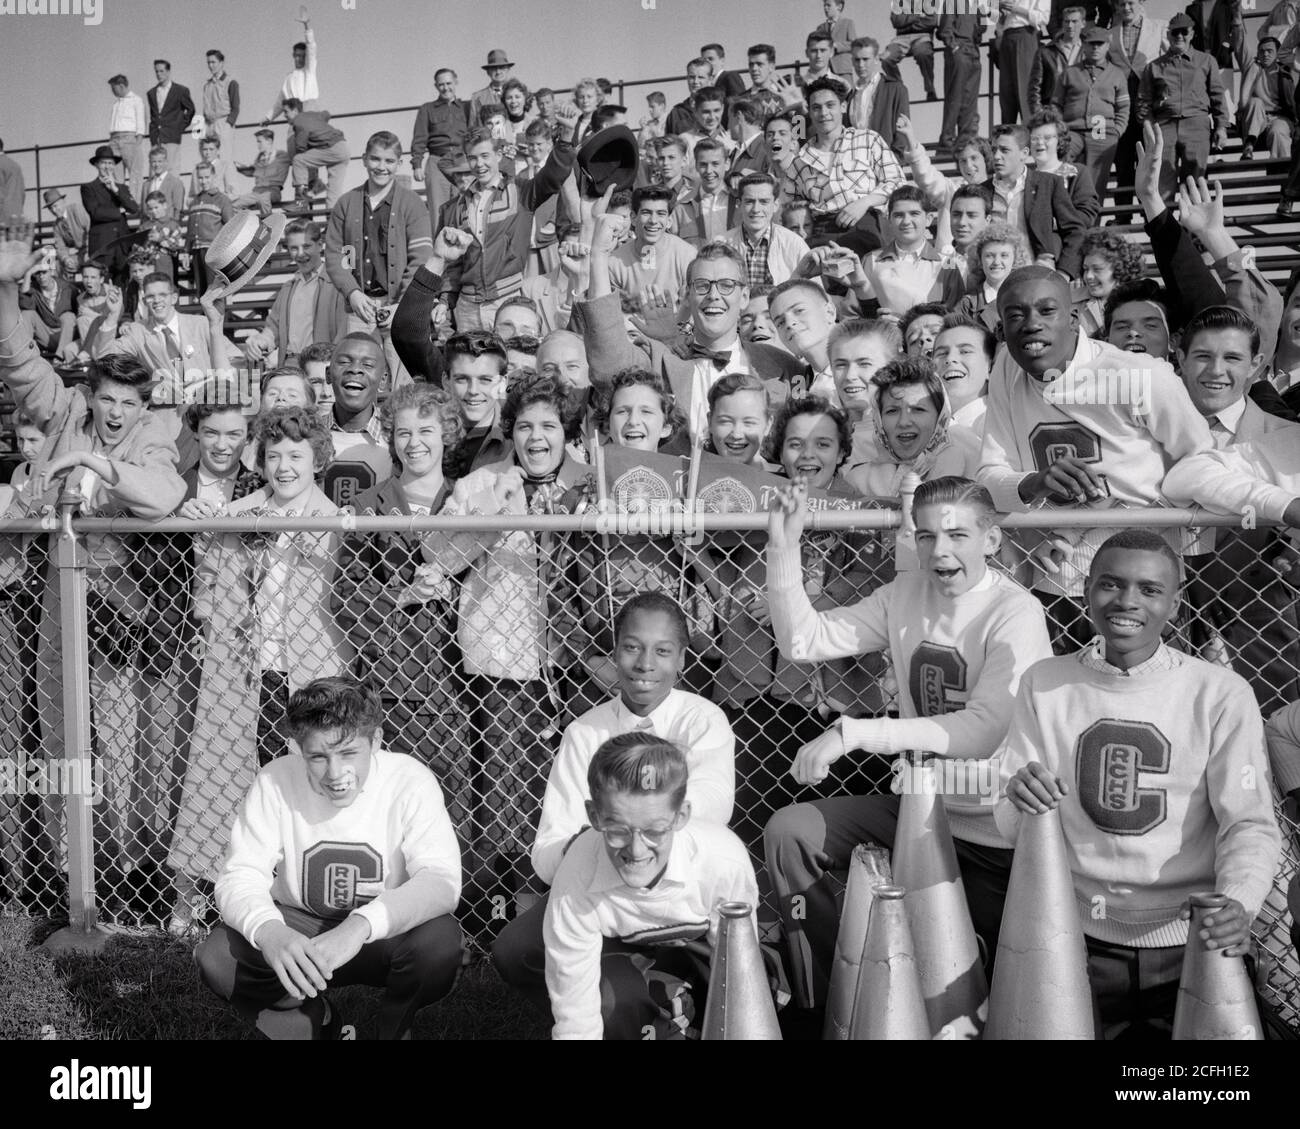 1950s ANONYMOUS HIGH SCHOOL STUDENTS CHEERLEADERS CHEERING SUPPORT FOR THEIR SPORTS FOOTBALL TEAM FROM BLEACHERS STANDS  - j1073 HAR001 HARS OLD FASHION JUVENILE DIVERSE TEAMWORK DIFFERENT PLEASED JOY LIFESTYLE CELEBRATION FEMALES HEALTHINESS COPY SPACE FRIENDSHIP HALF-LENGTH PERSONS INSPIRATION MALES TEENAGE GIRL TEENAGE BOY B&W EYE CONTACT SCHOOLS HAPPINESS CHEERFUL AFRICAN-AMERICANS AFRICAN-AMERICAN EXCITEMENT LEADERSHIP LOW ANGLE RECREATION CHEERLEADERS BLACK ETHNICITY PRIDE HIGH SCHOOL SMILES HIGH SCHOOLS CONCEPTUAL BLEACHERS JOYFUL SUPPORT TEENAGED VARIOUS ANONYMOUS STANDS VARIED Stock Photo